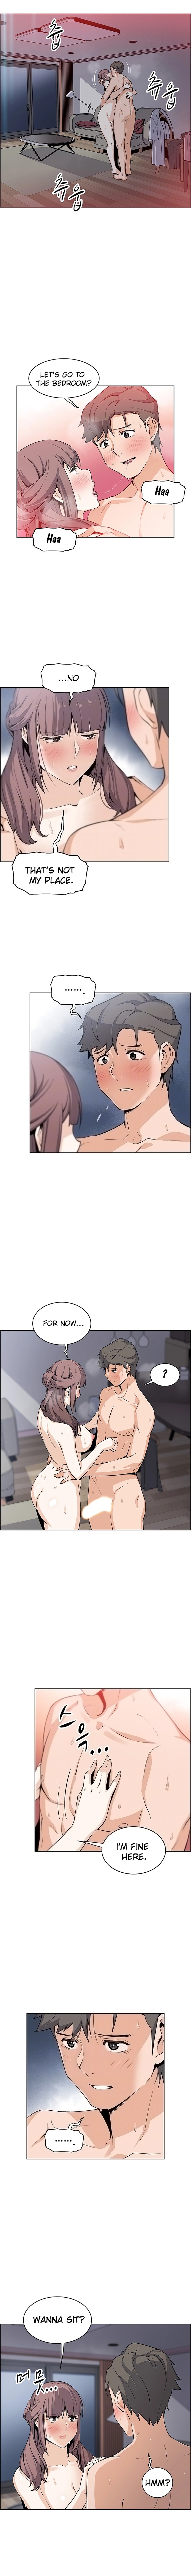 Housekeeper Manhwa - Chapter 26 Page 2